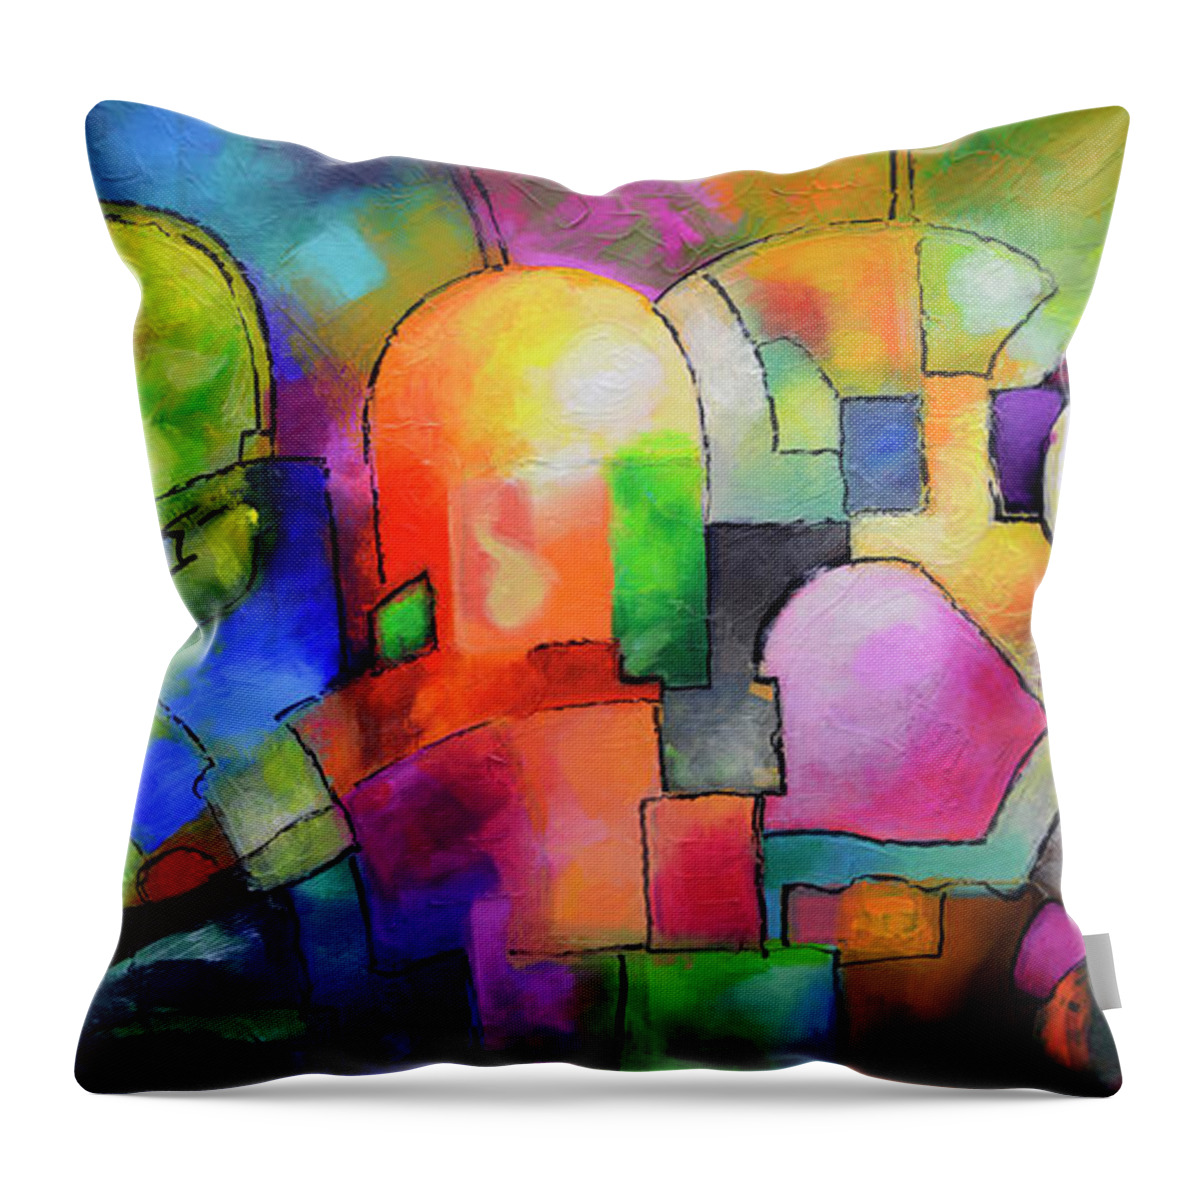 Big City Throw Pillow featuring the painting Big City by Sally Trace